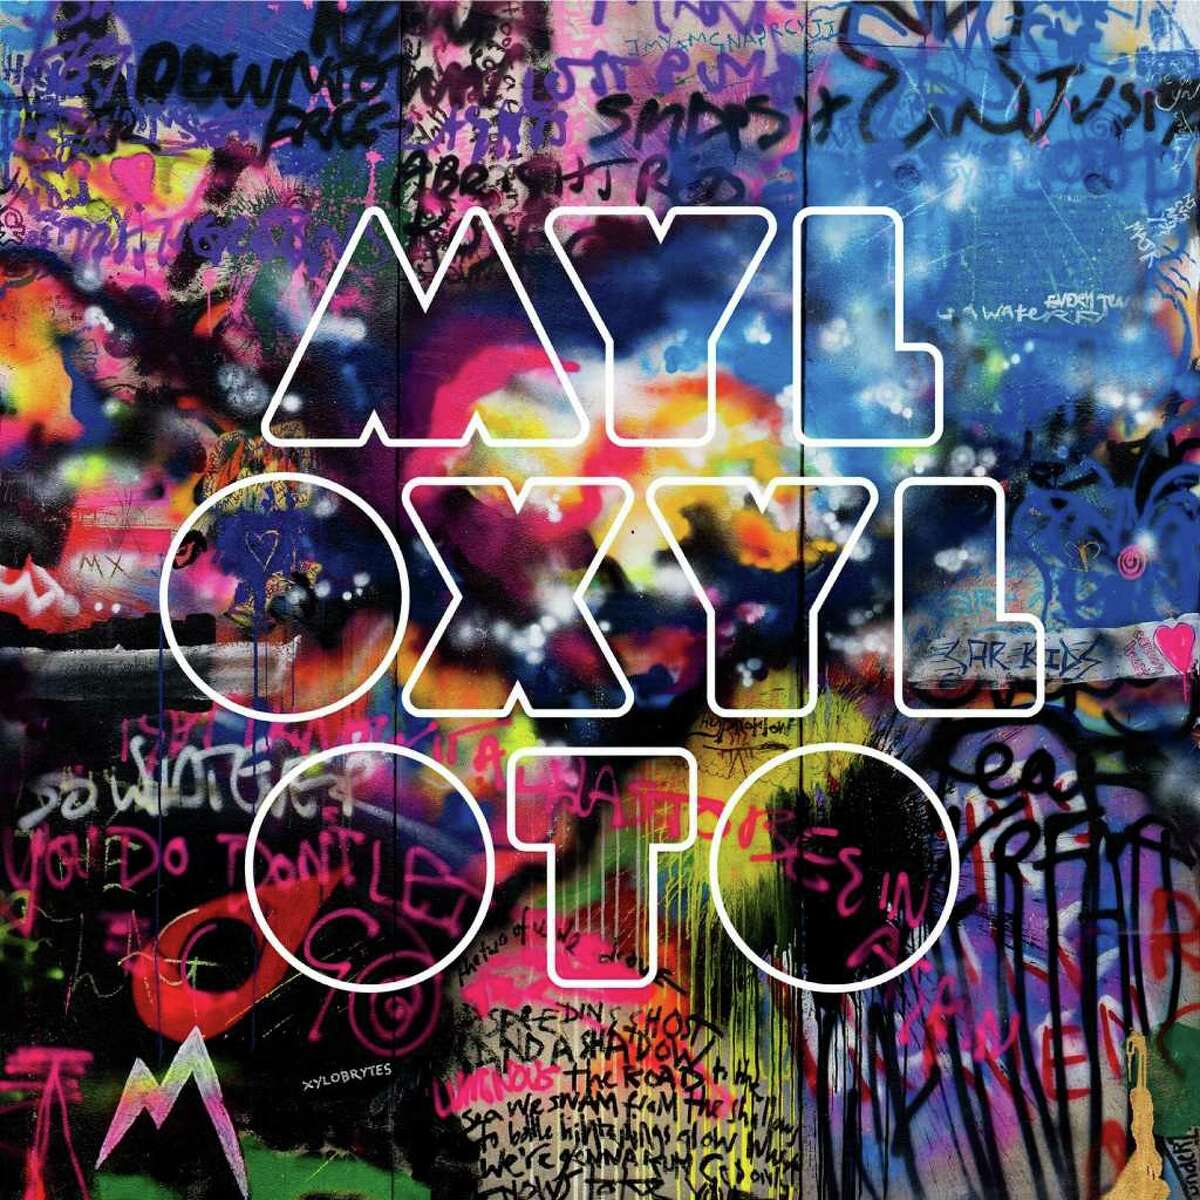 coldplay album cover for Mylo Xyloto